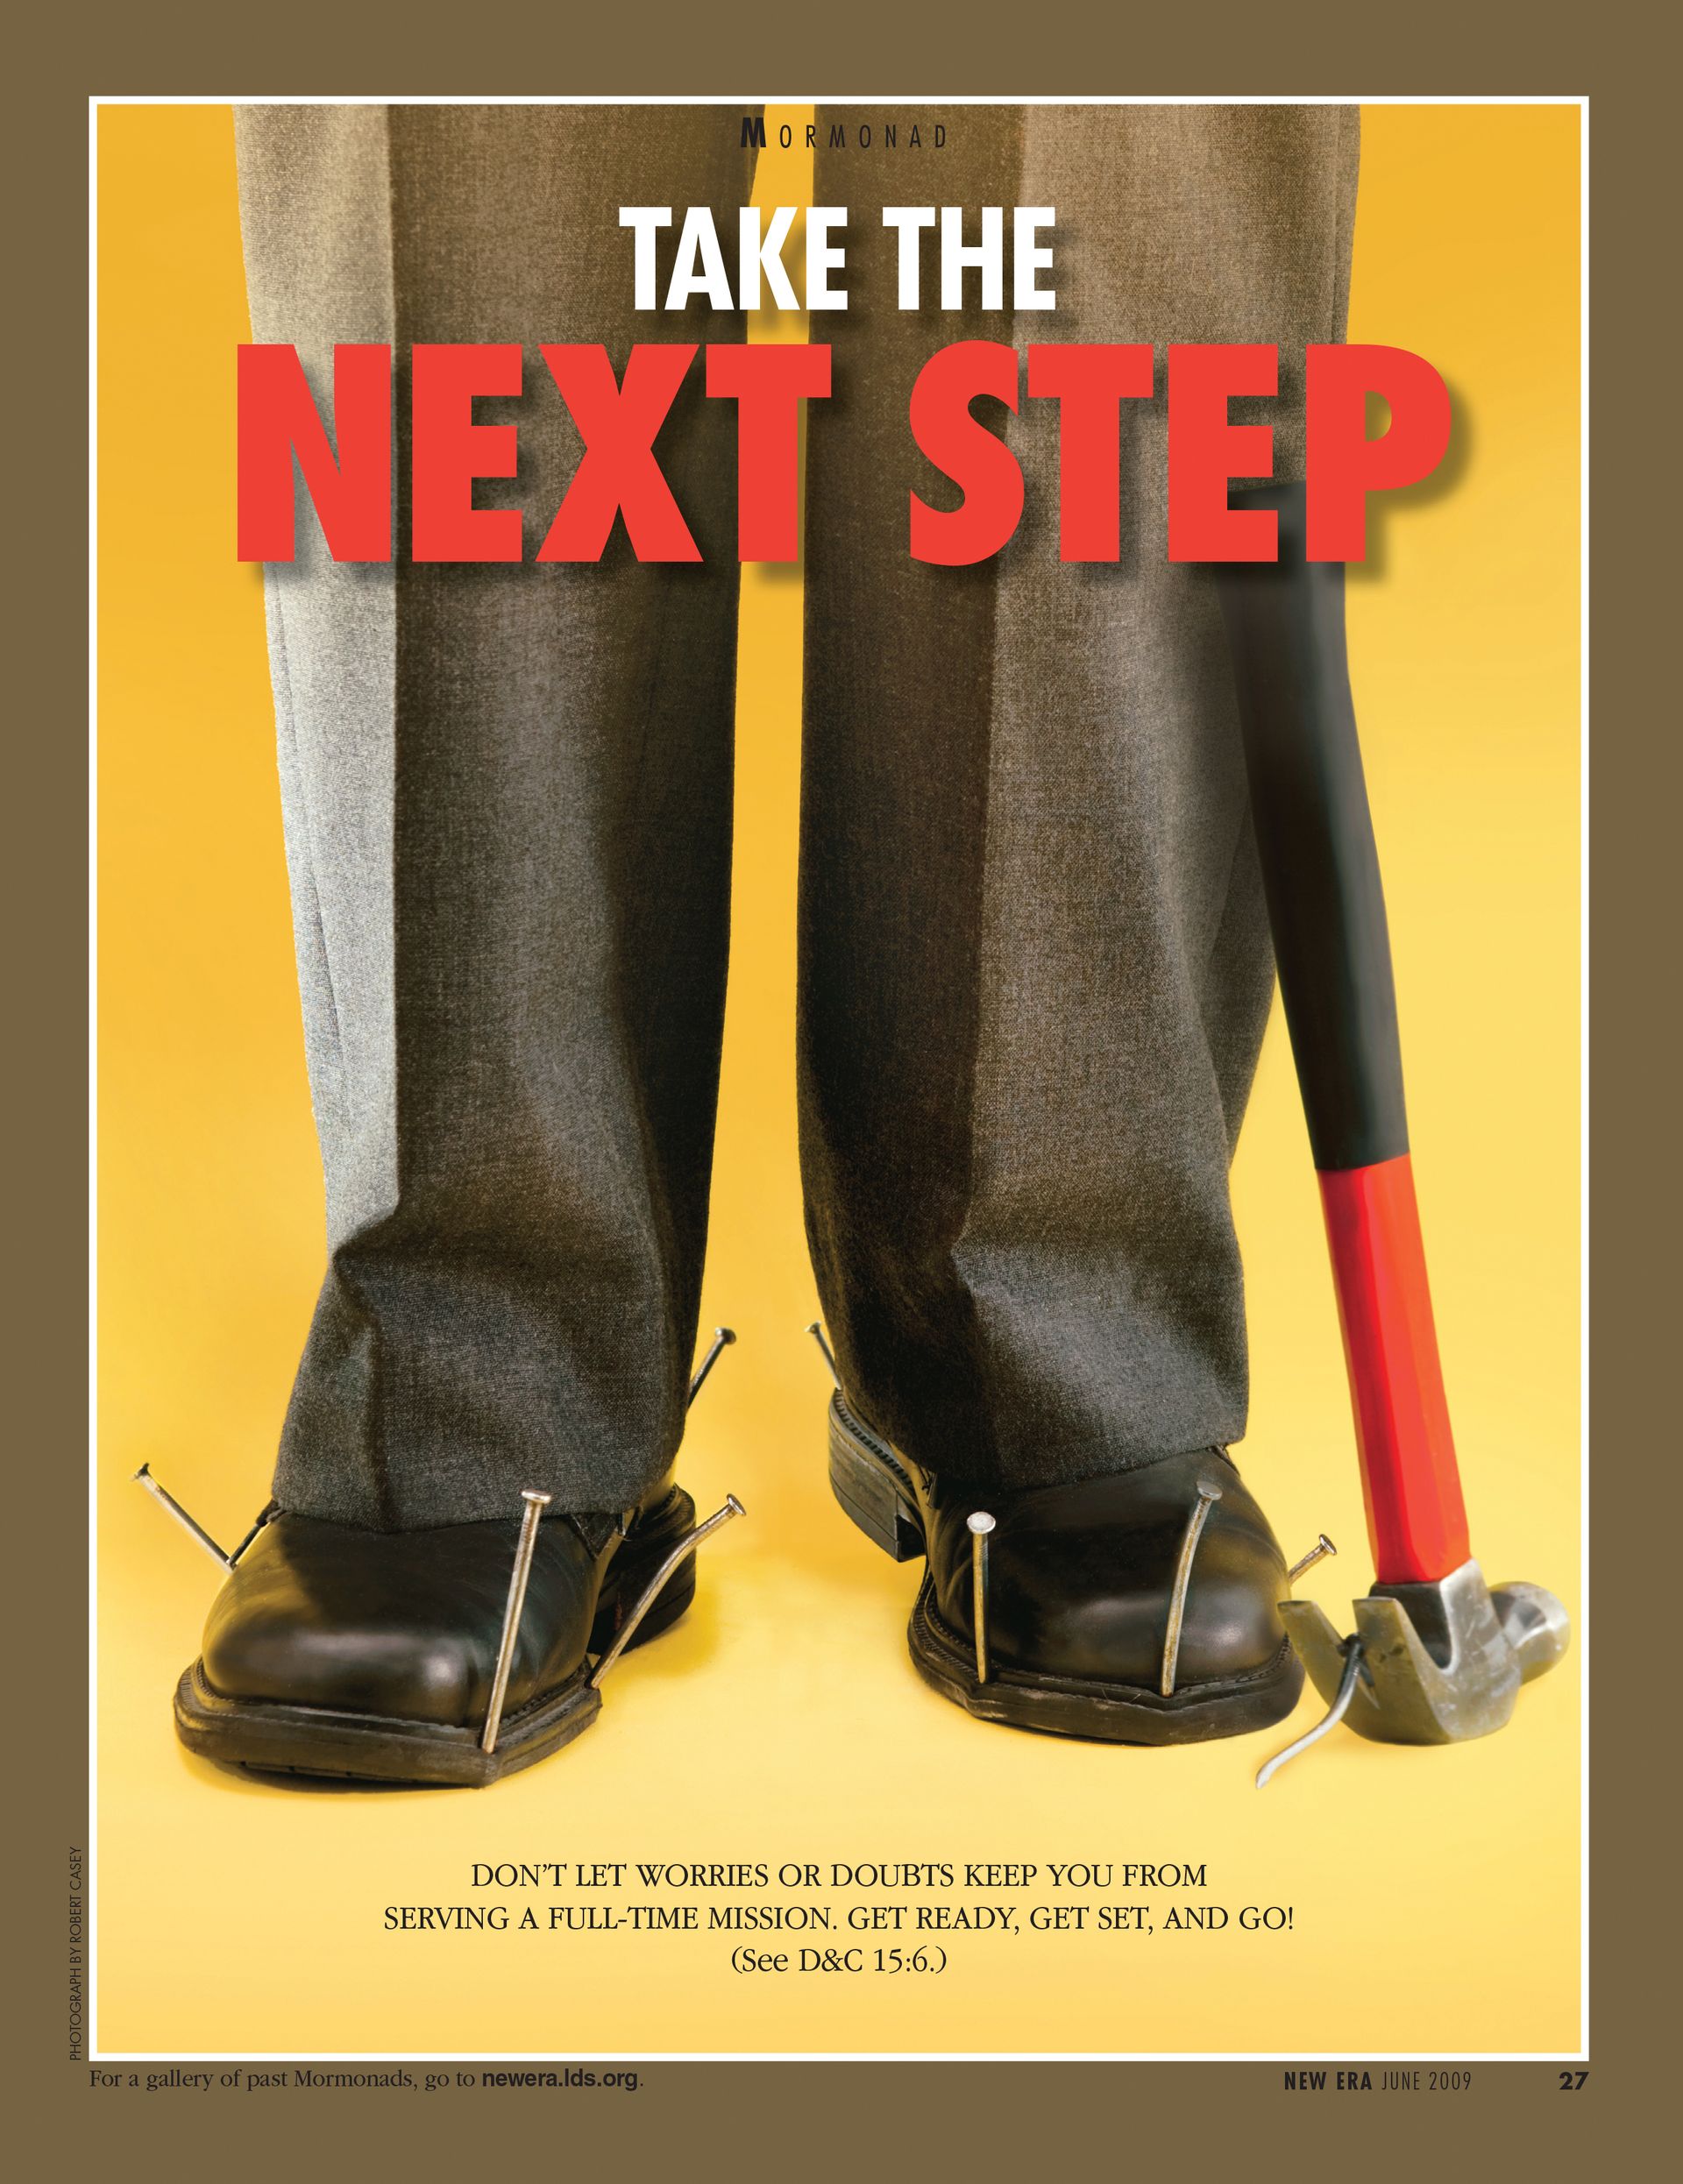 Take the Next Step. Don't let worries or doubts keep you from serving a full-time mission. Get ready, get set, and go! (See D&C 15:6.) June 2009 © undefined ipCode 1.